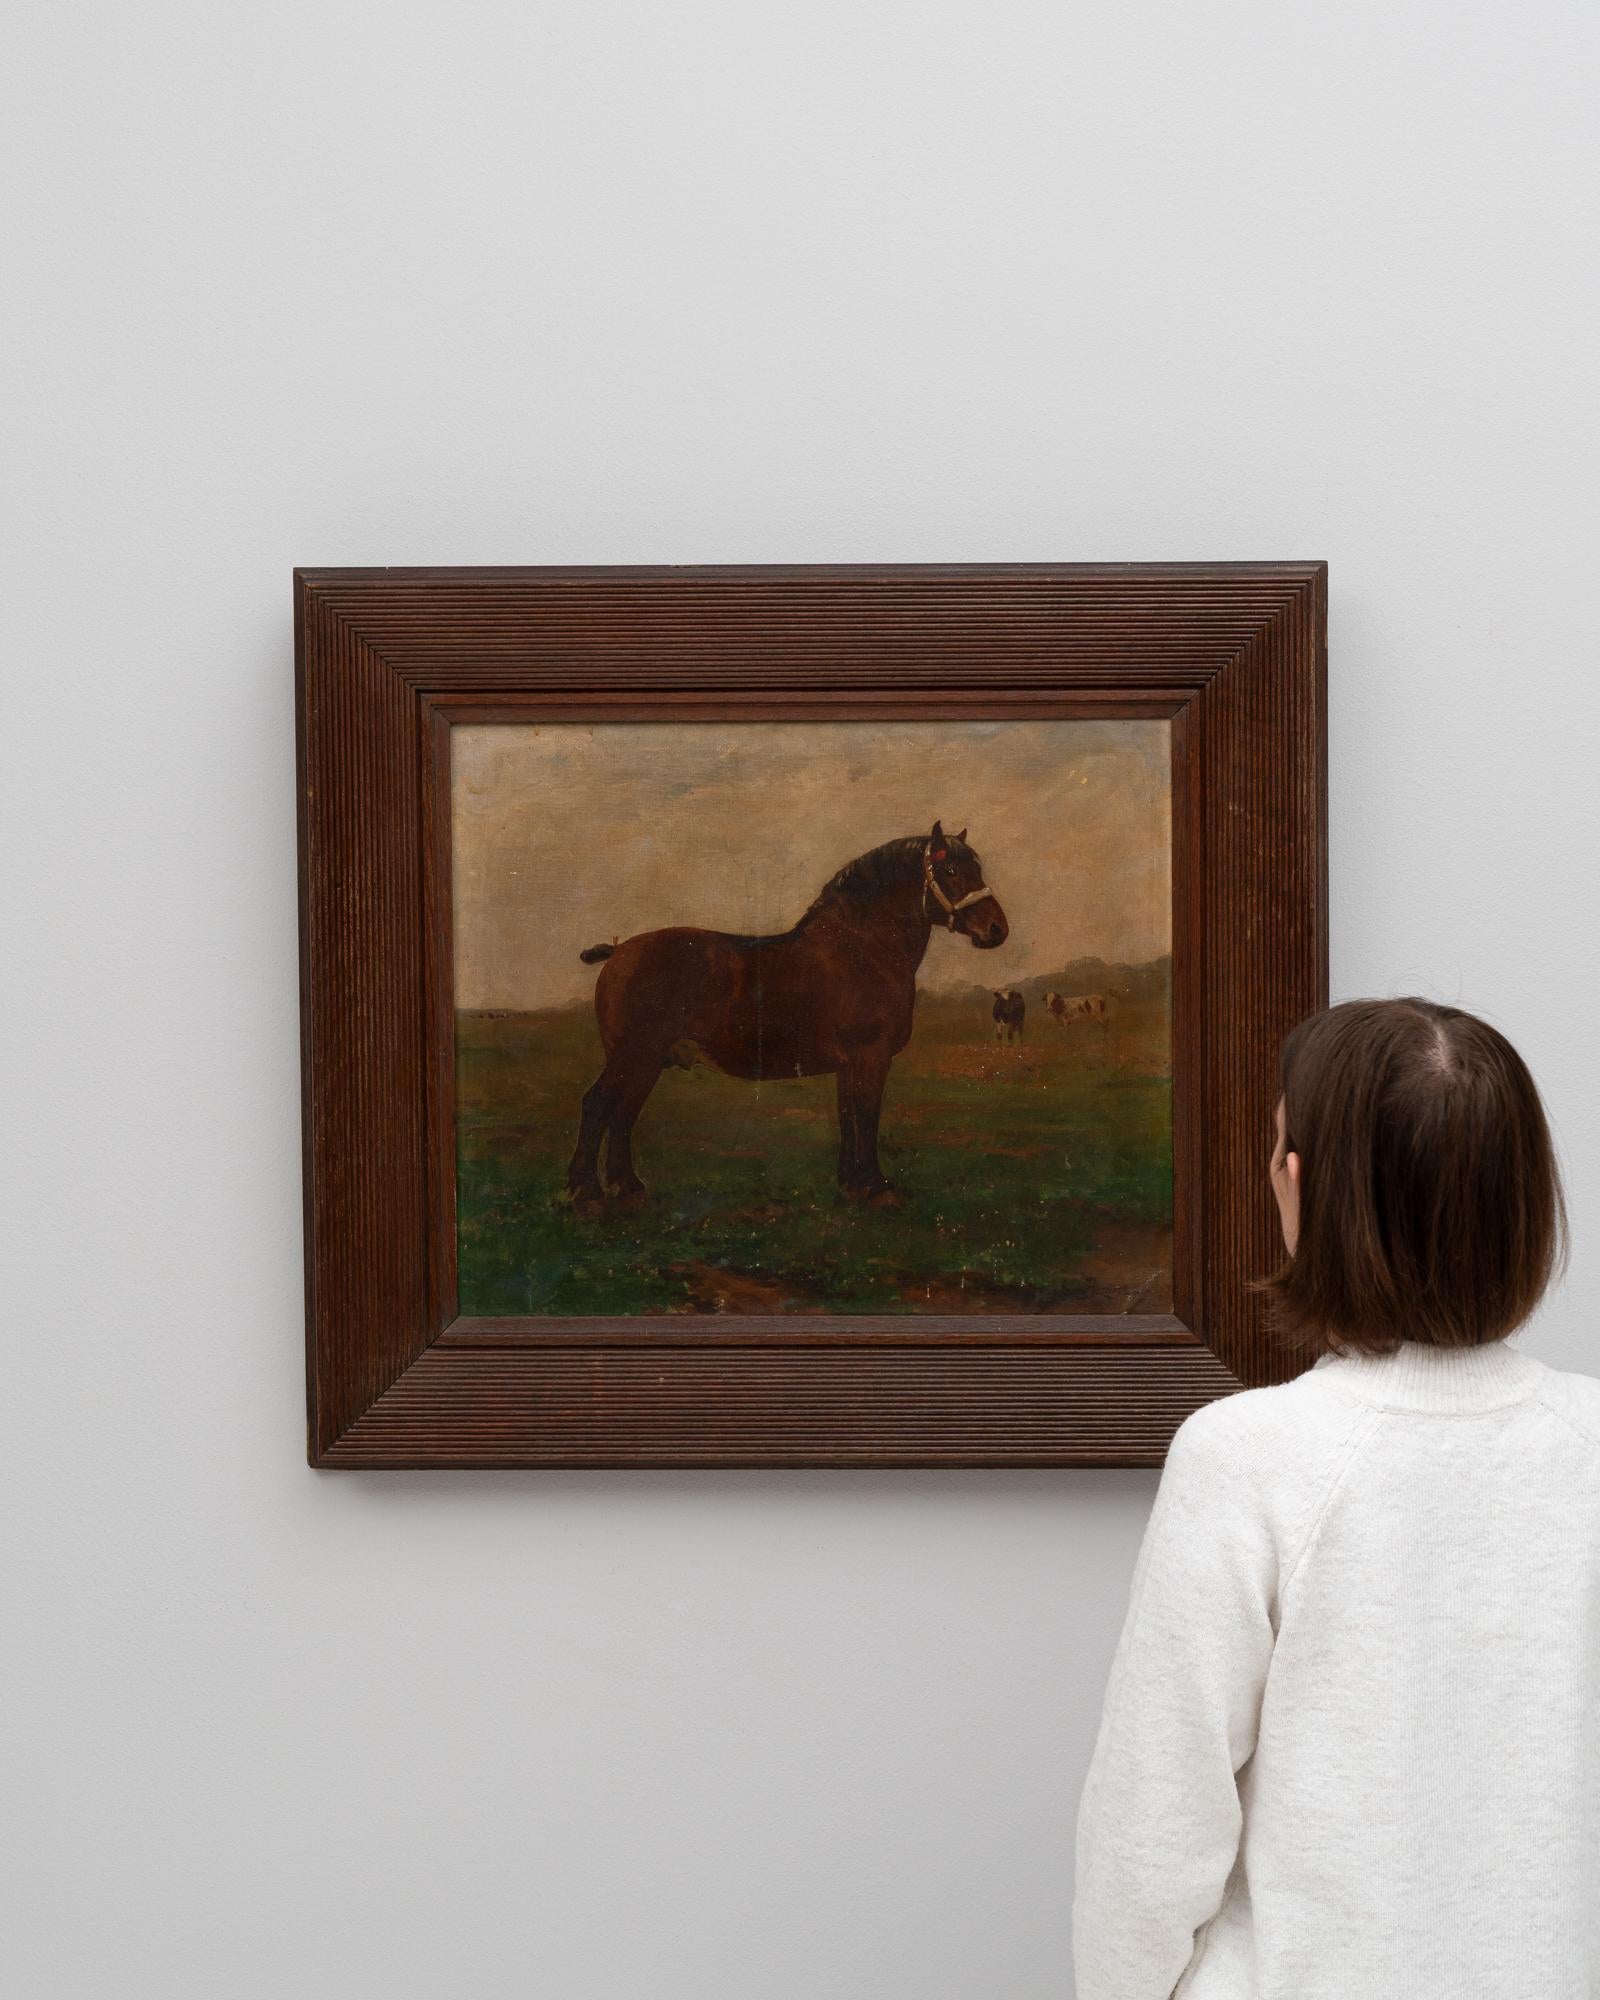 This 19th Century Belgian Painting captures the pastoral elegance and serene beauty of rural life. The artwork showcases a majestic horse in the foreground, its rich brown coat glowing against the soft, earthy tones of the landscape. Each